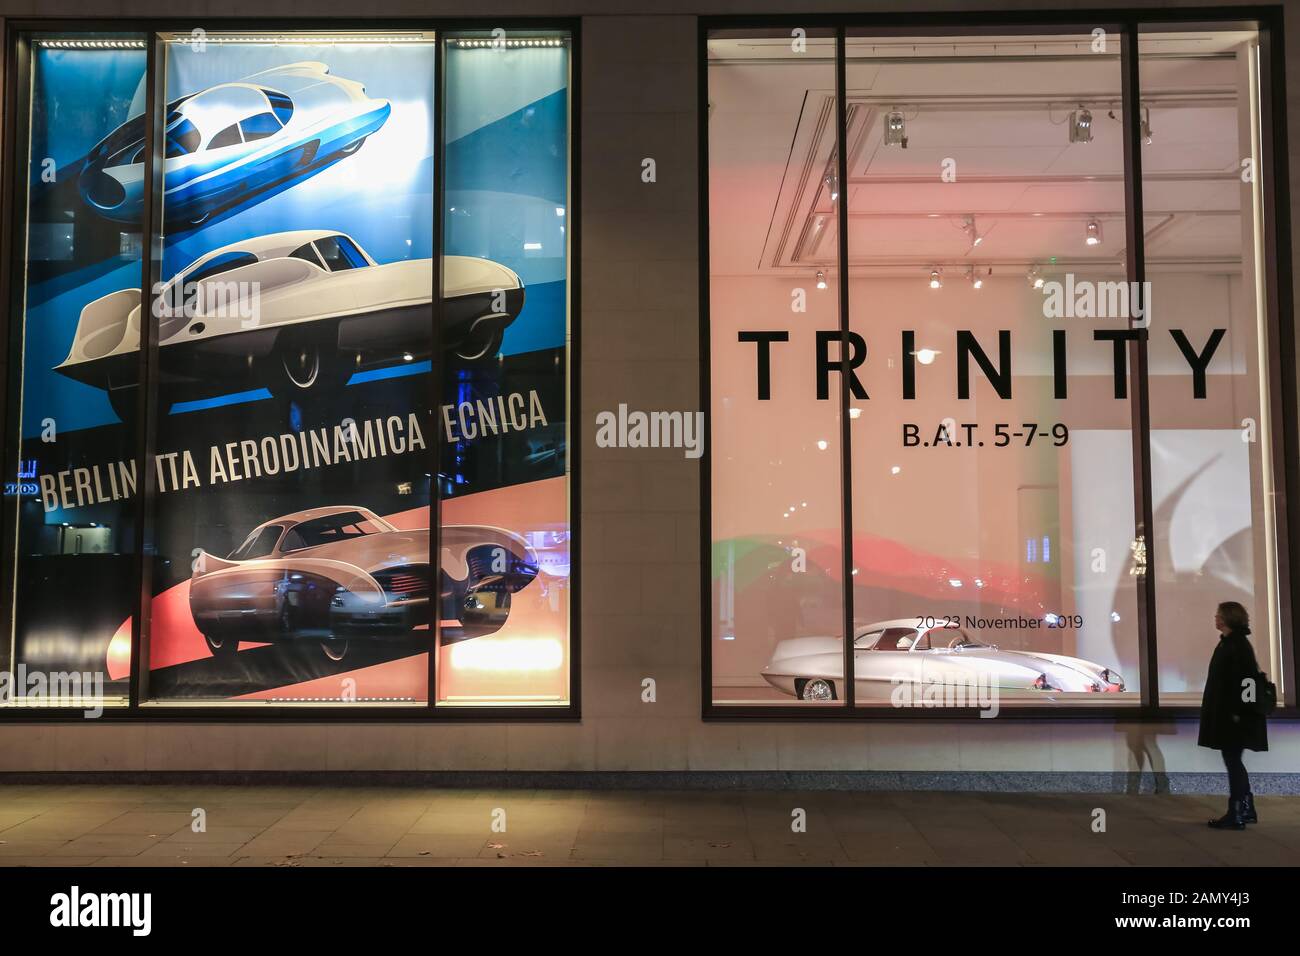 Phillips exhibition Trinity: B.A.T. 5-7-9, an exhibition showcasing three of Alfa Romeo's iconic 1950 concept cars. London, UK. Credit Waldemar Sikora Stock Photo